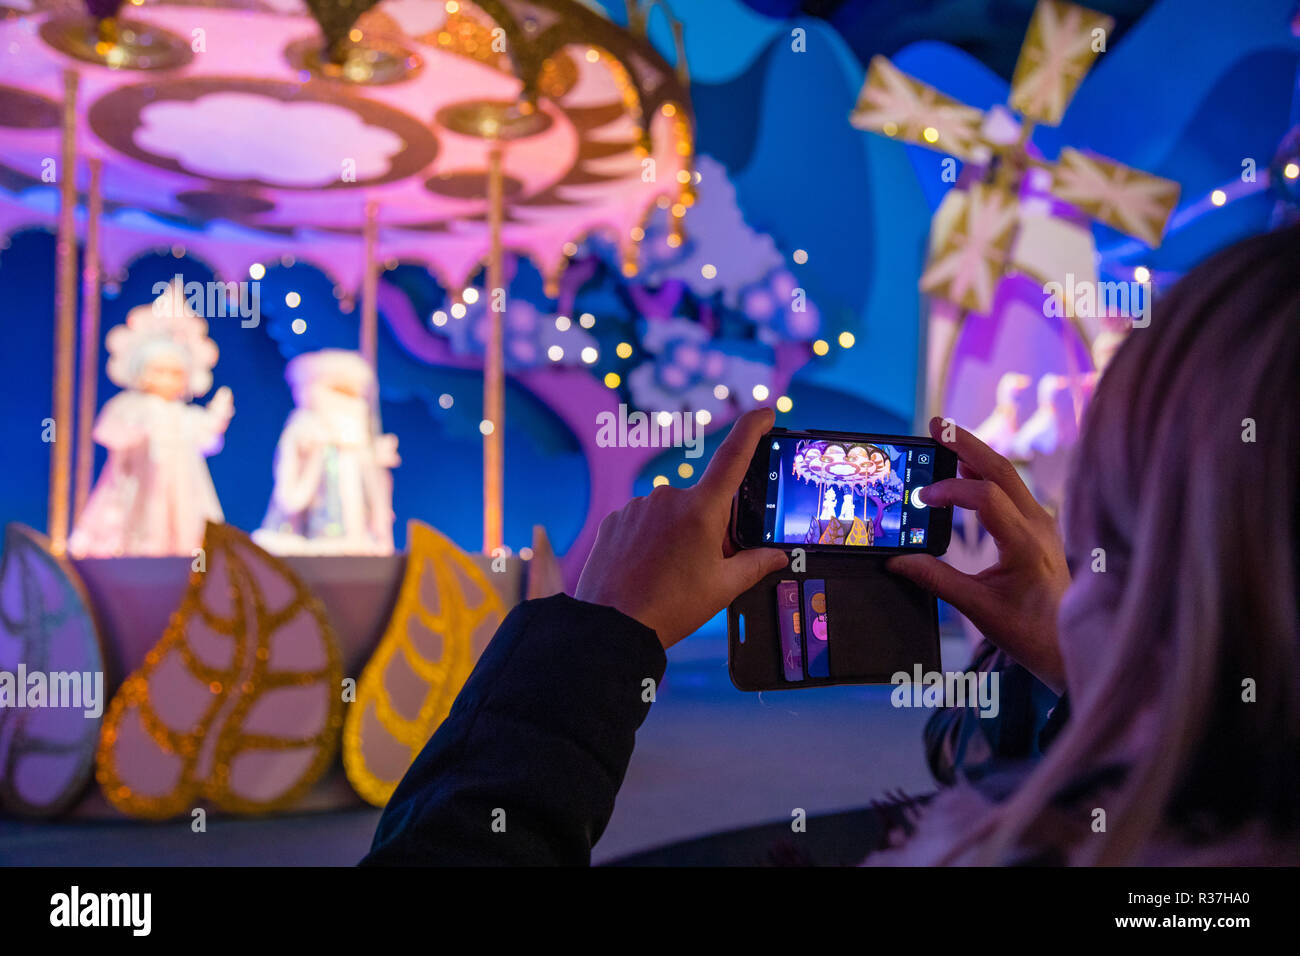 Disney Land Paris, France, November 2018: Woman taking a picture with her smartphone inside Small World a boat ride attraction. Stock Photo